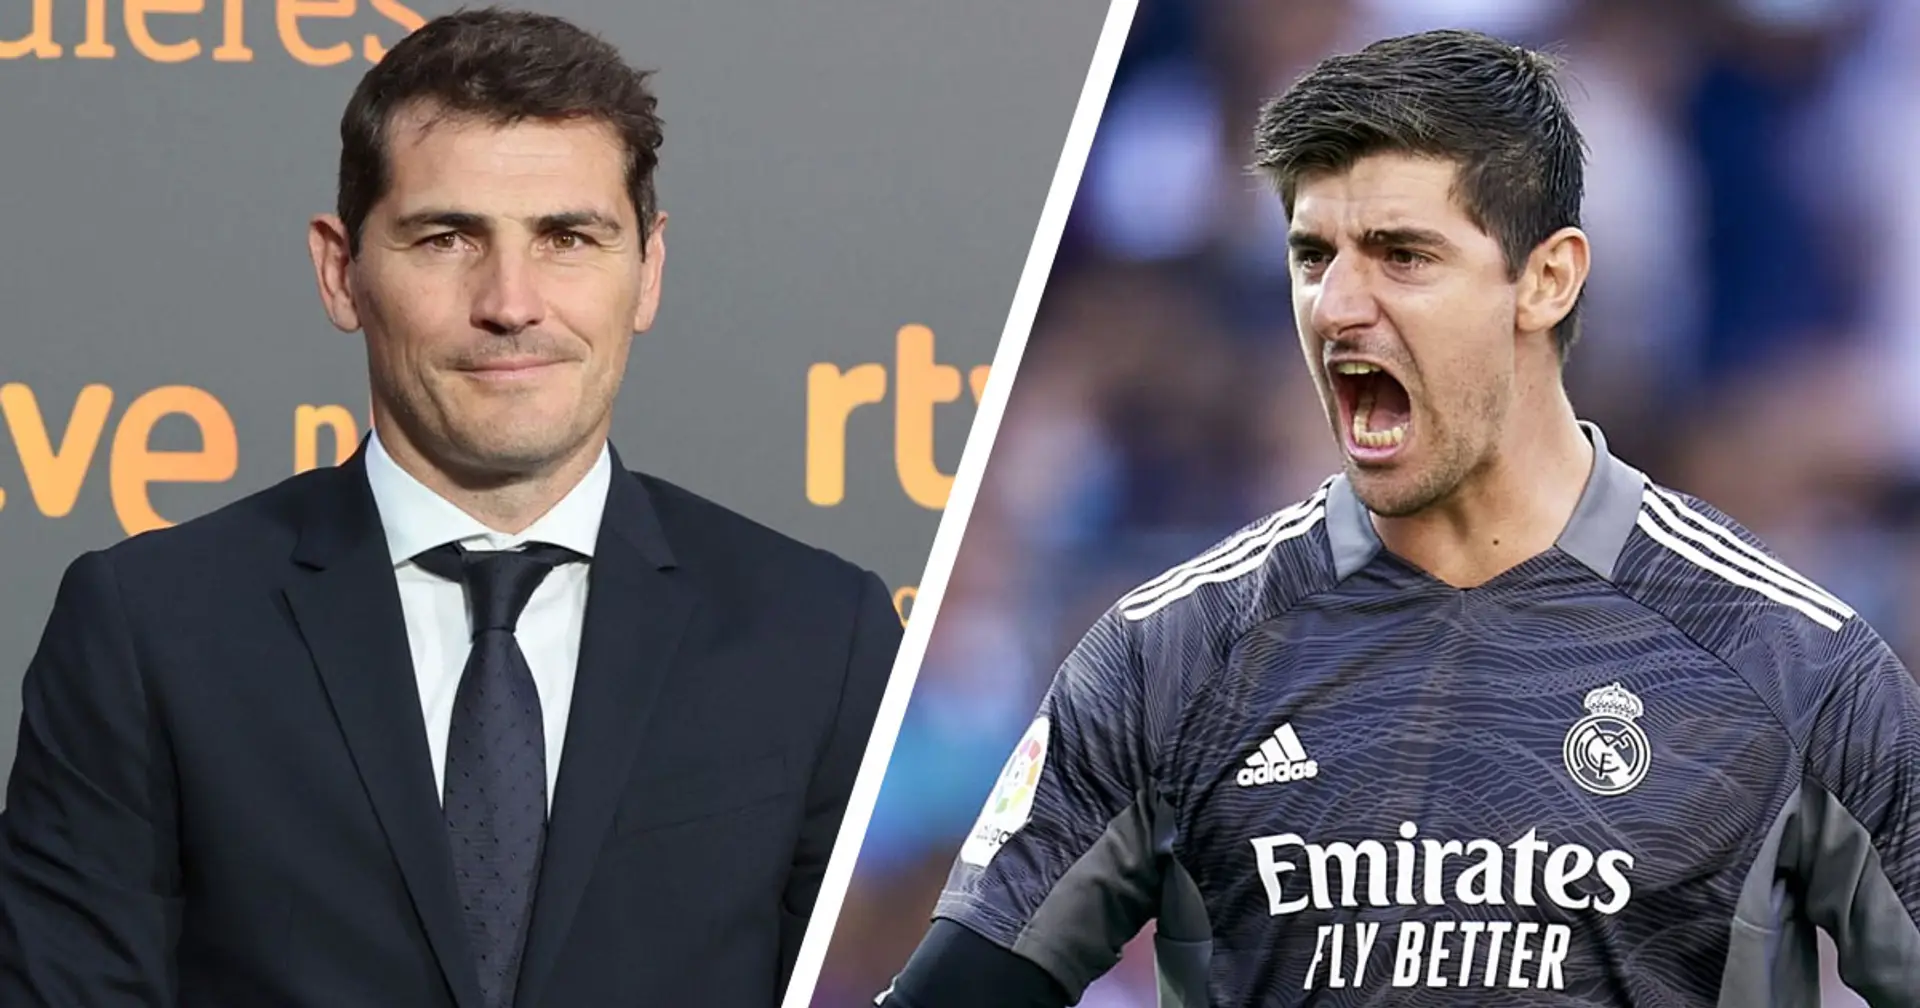 Casillas in hot waters after controversial tweet and 2 more big stories you could've missed